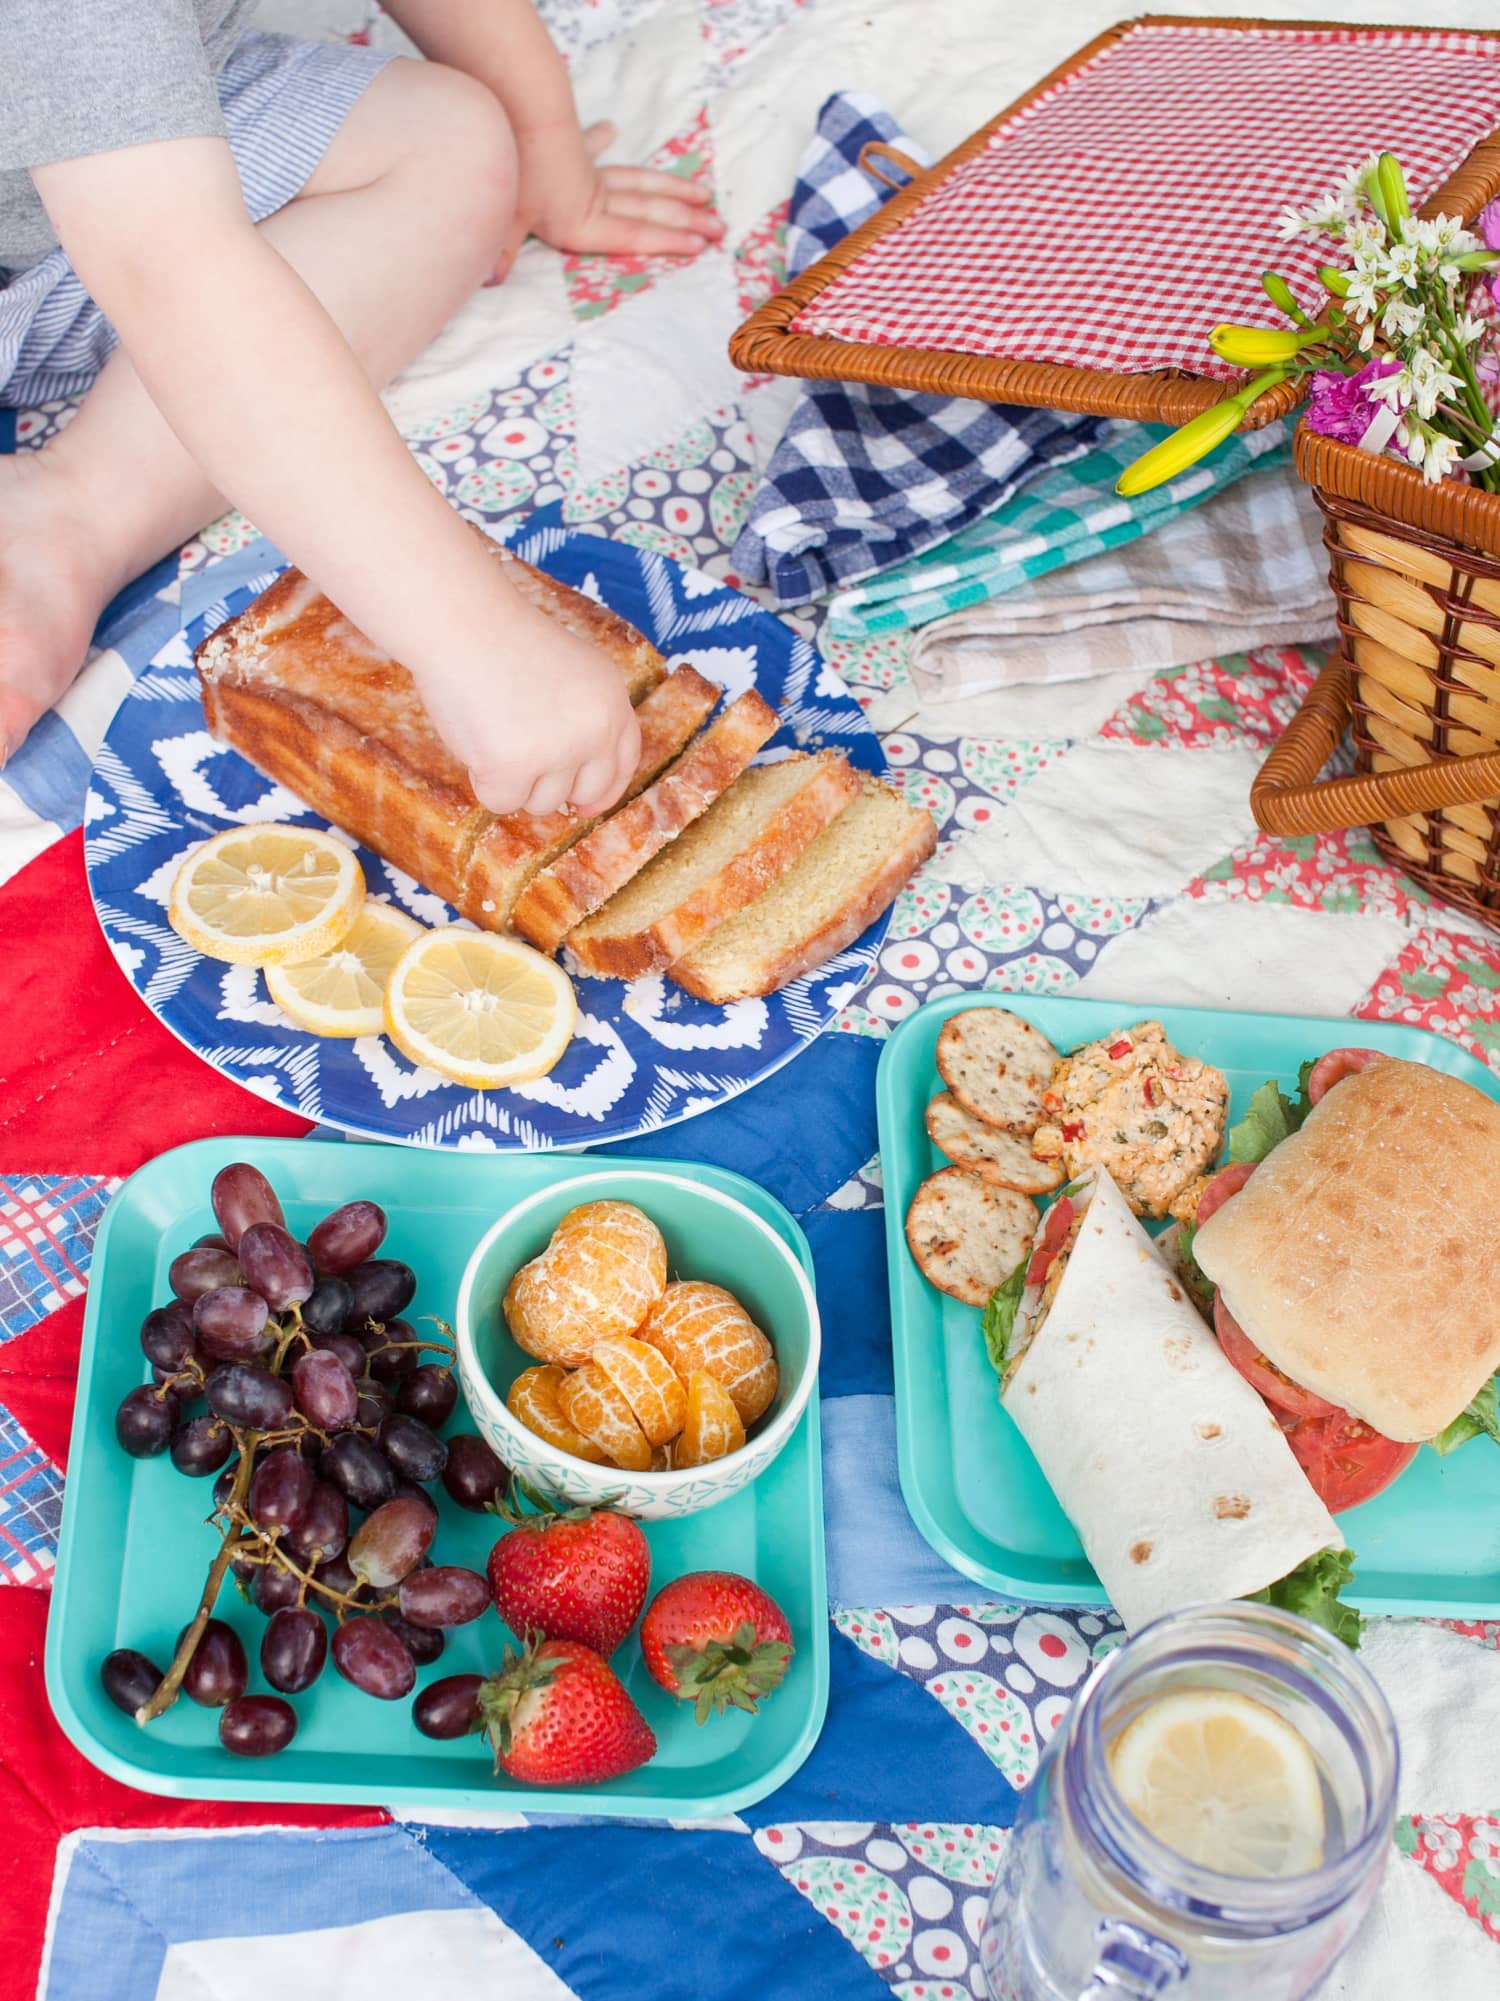 6 Mother's Day Picnic Ideas If Traditional Brunch Isn't Her Thing